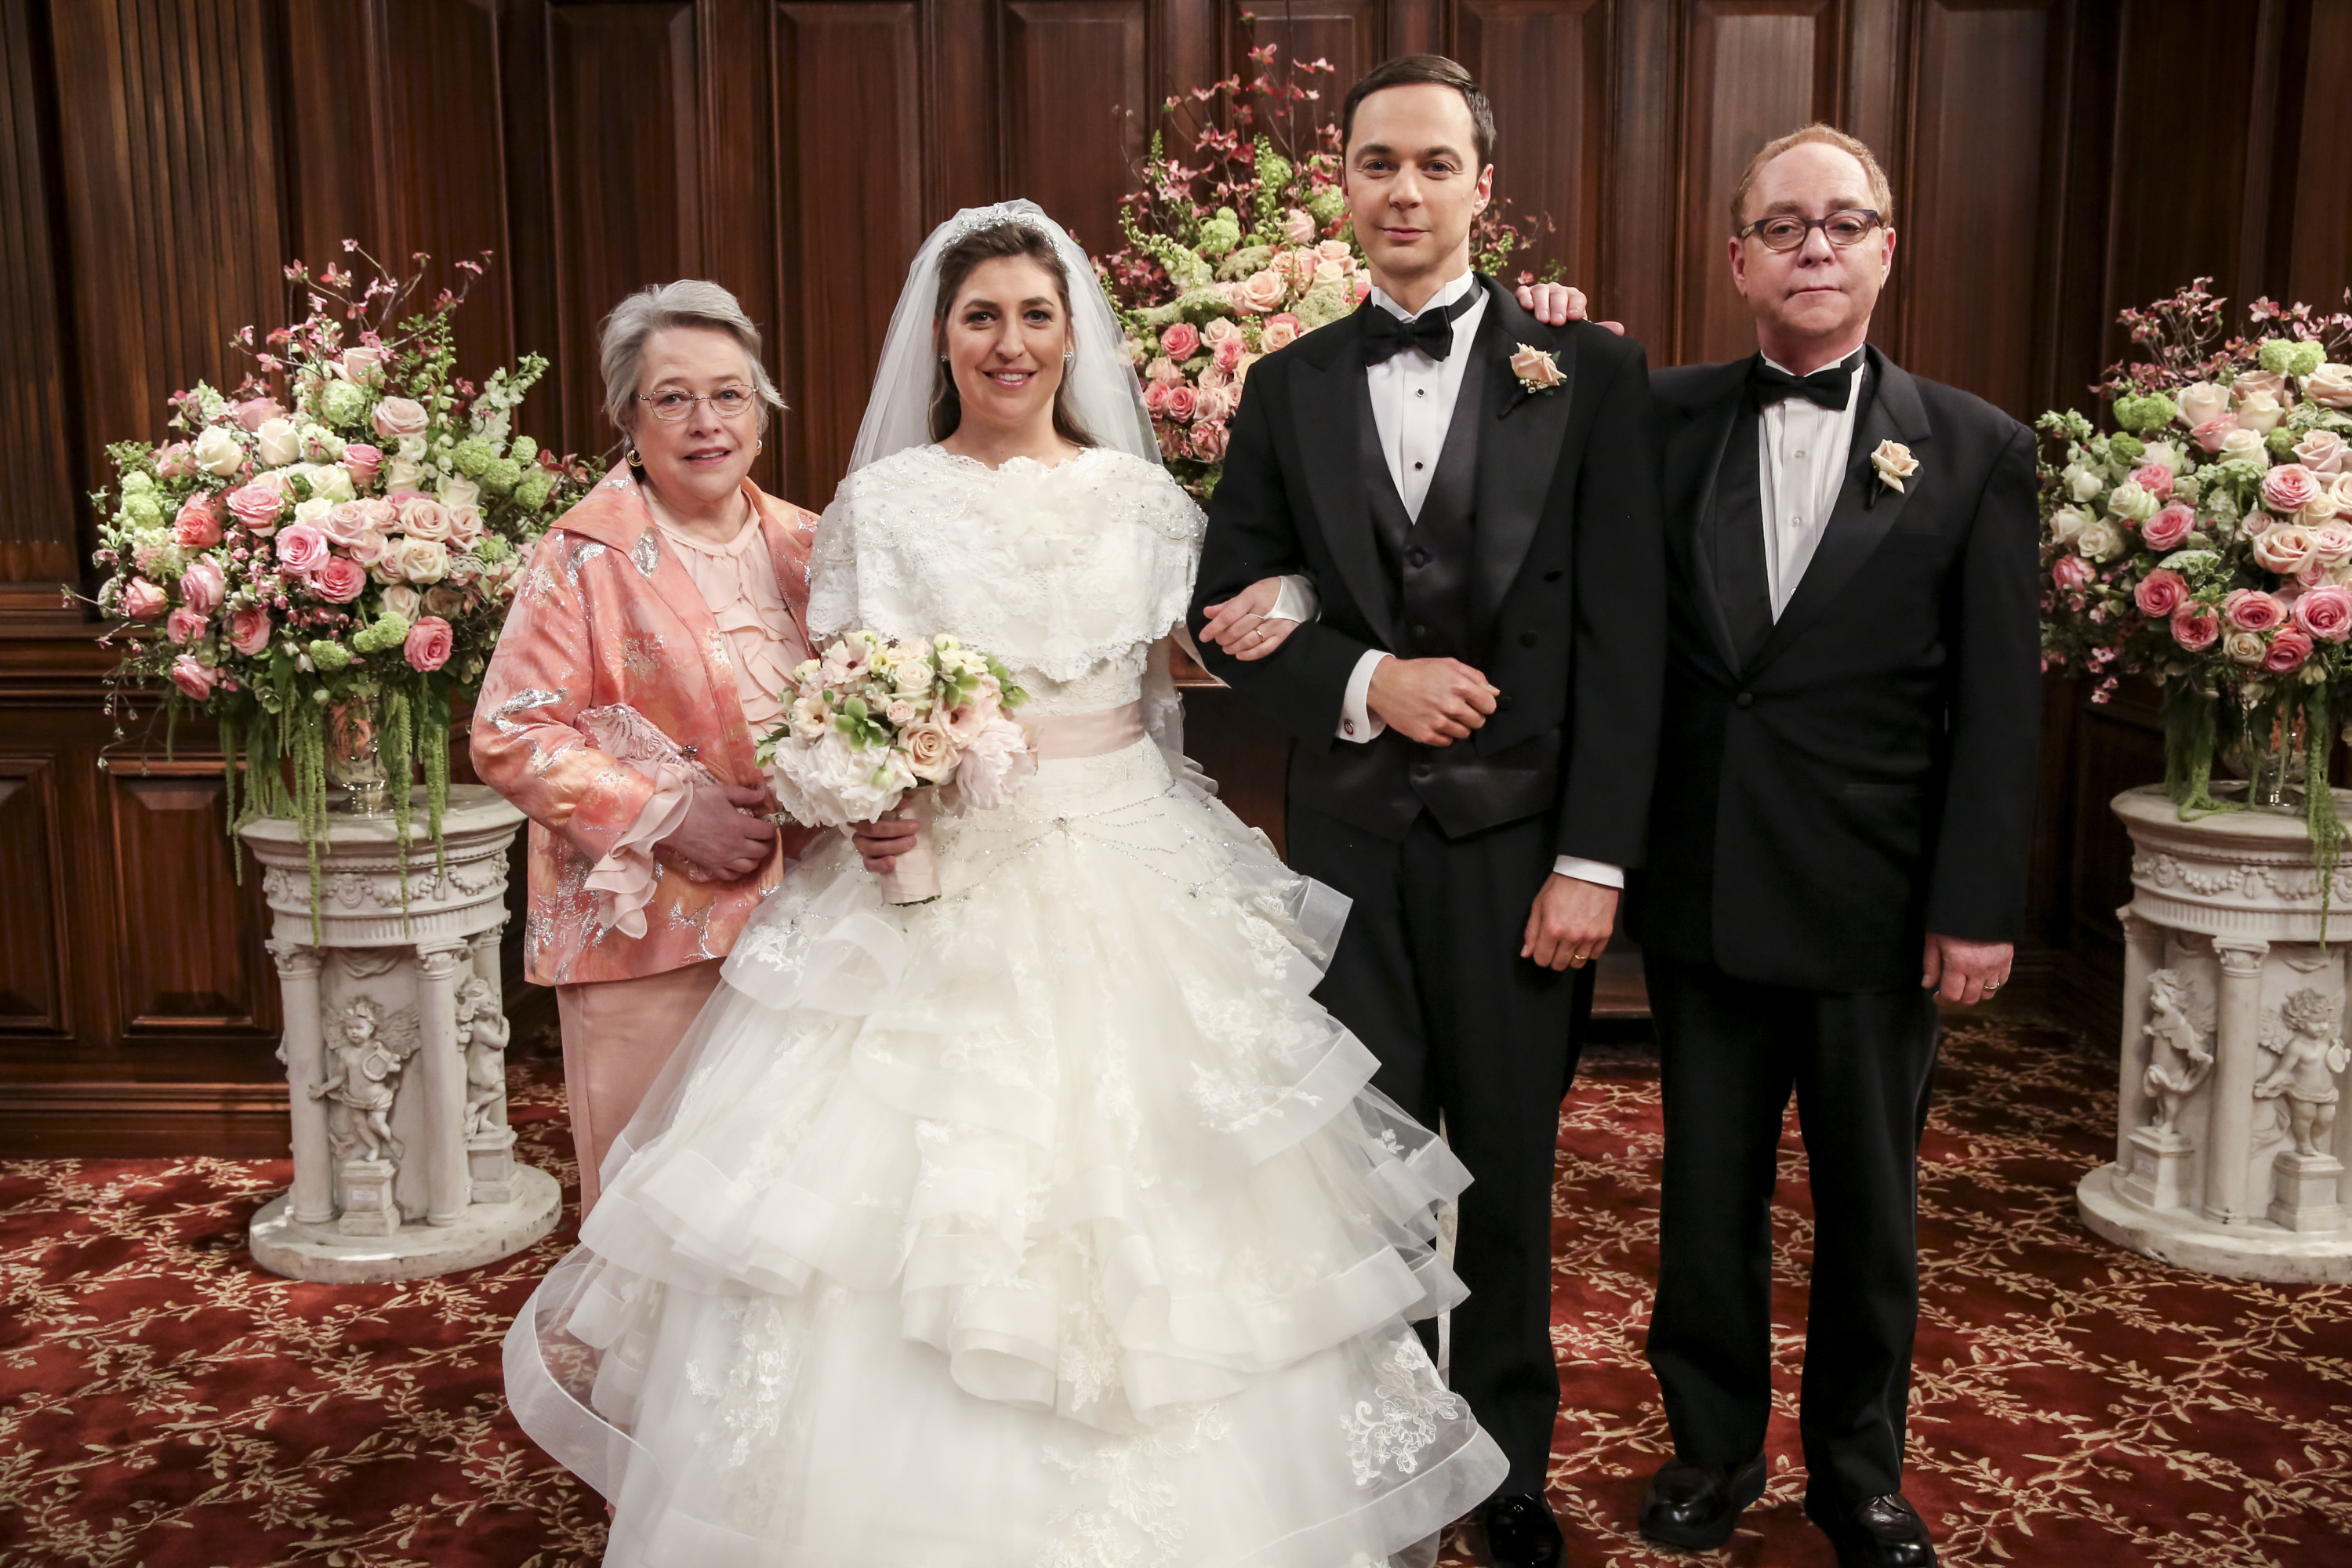 Mrs. Fowler (Kathy Bates), Amy Farrah Fowler (Mayim Bialik), Sheldon Cooper (Jim Parsons) and Mr. Fowler (Teller) on the 11th season finale of "The Big Bang Theory" | Source: Getty Images